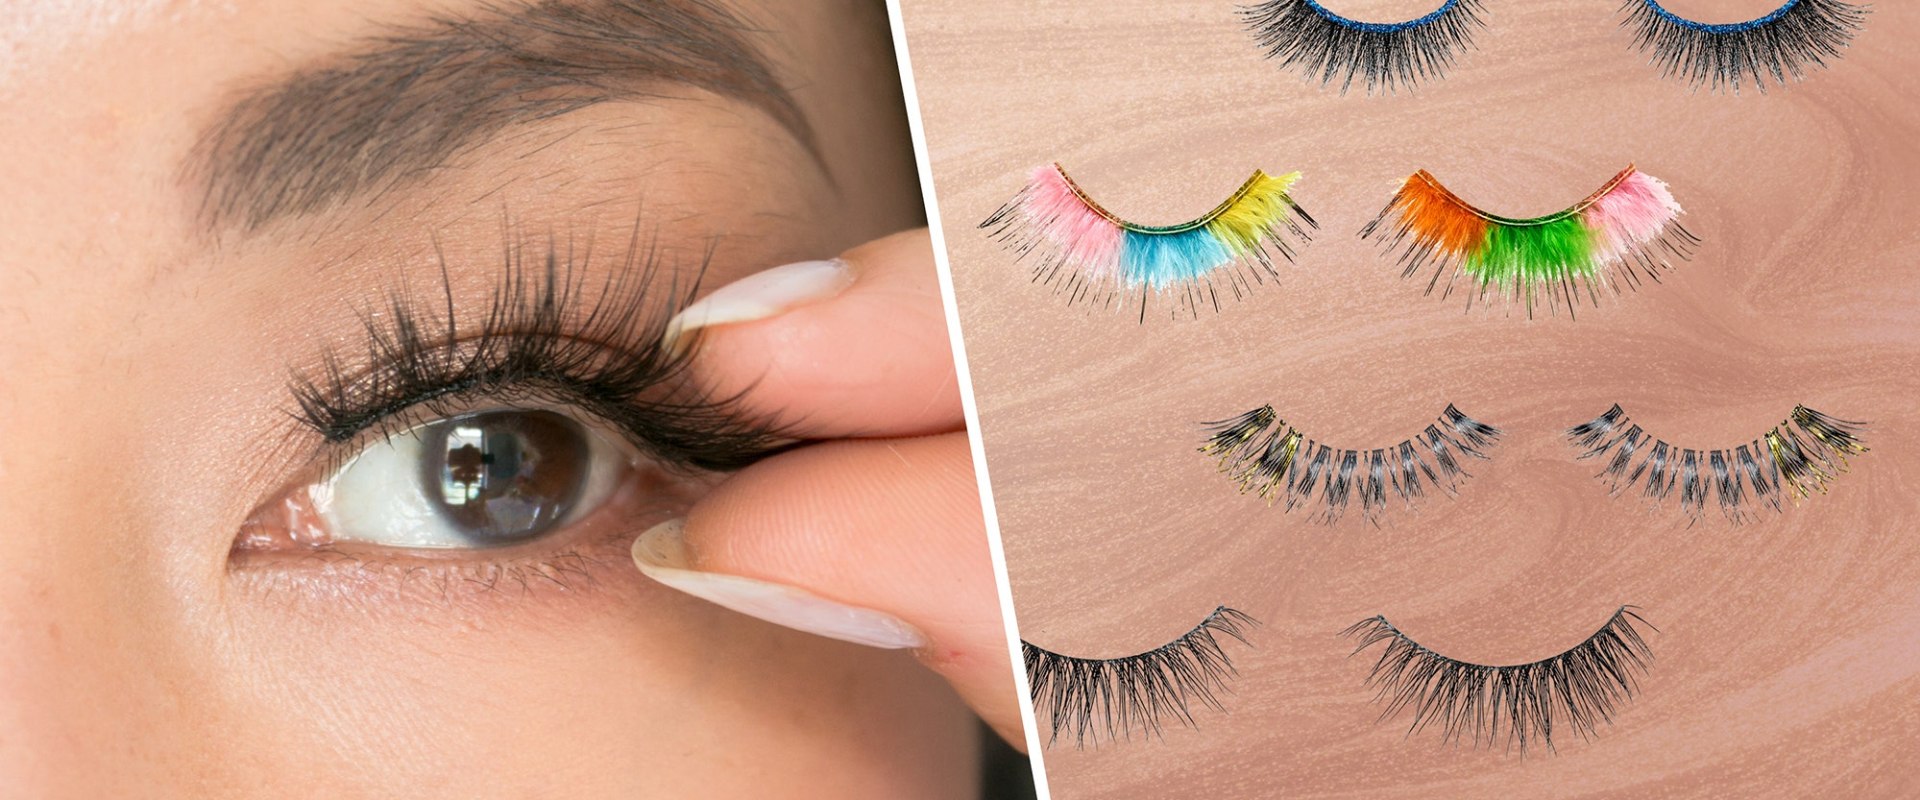 How Often Should You Refill Your Eyelash Extensions?